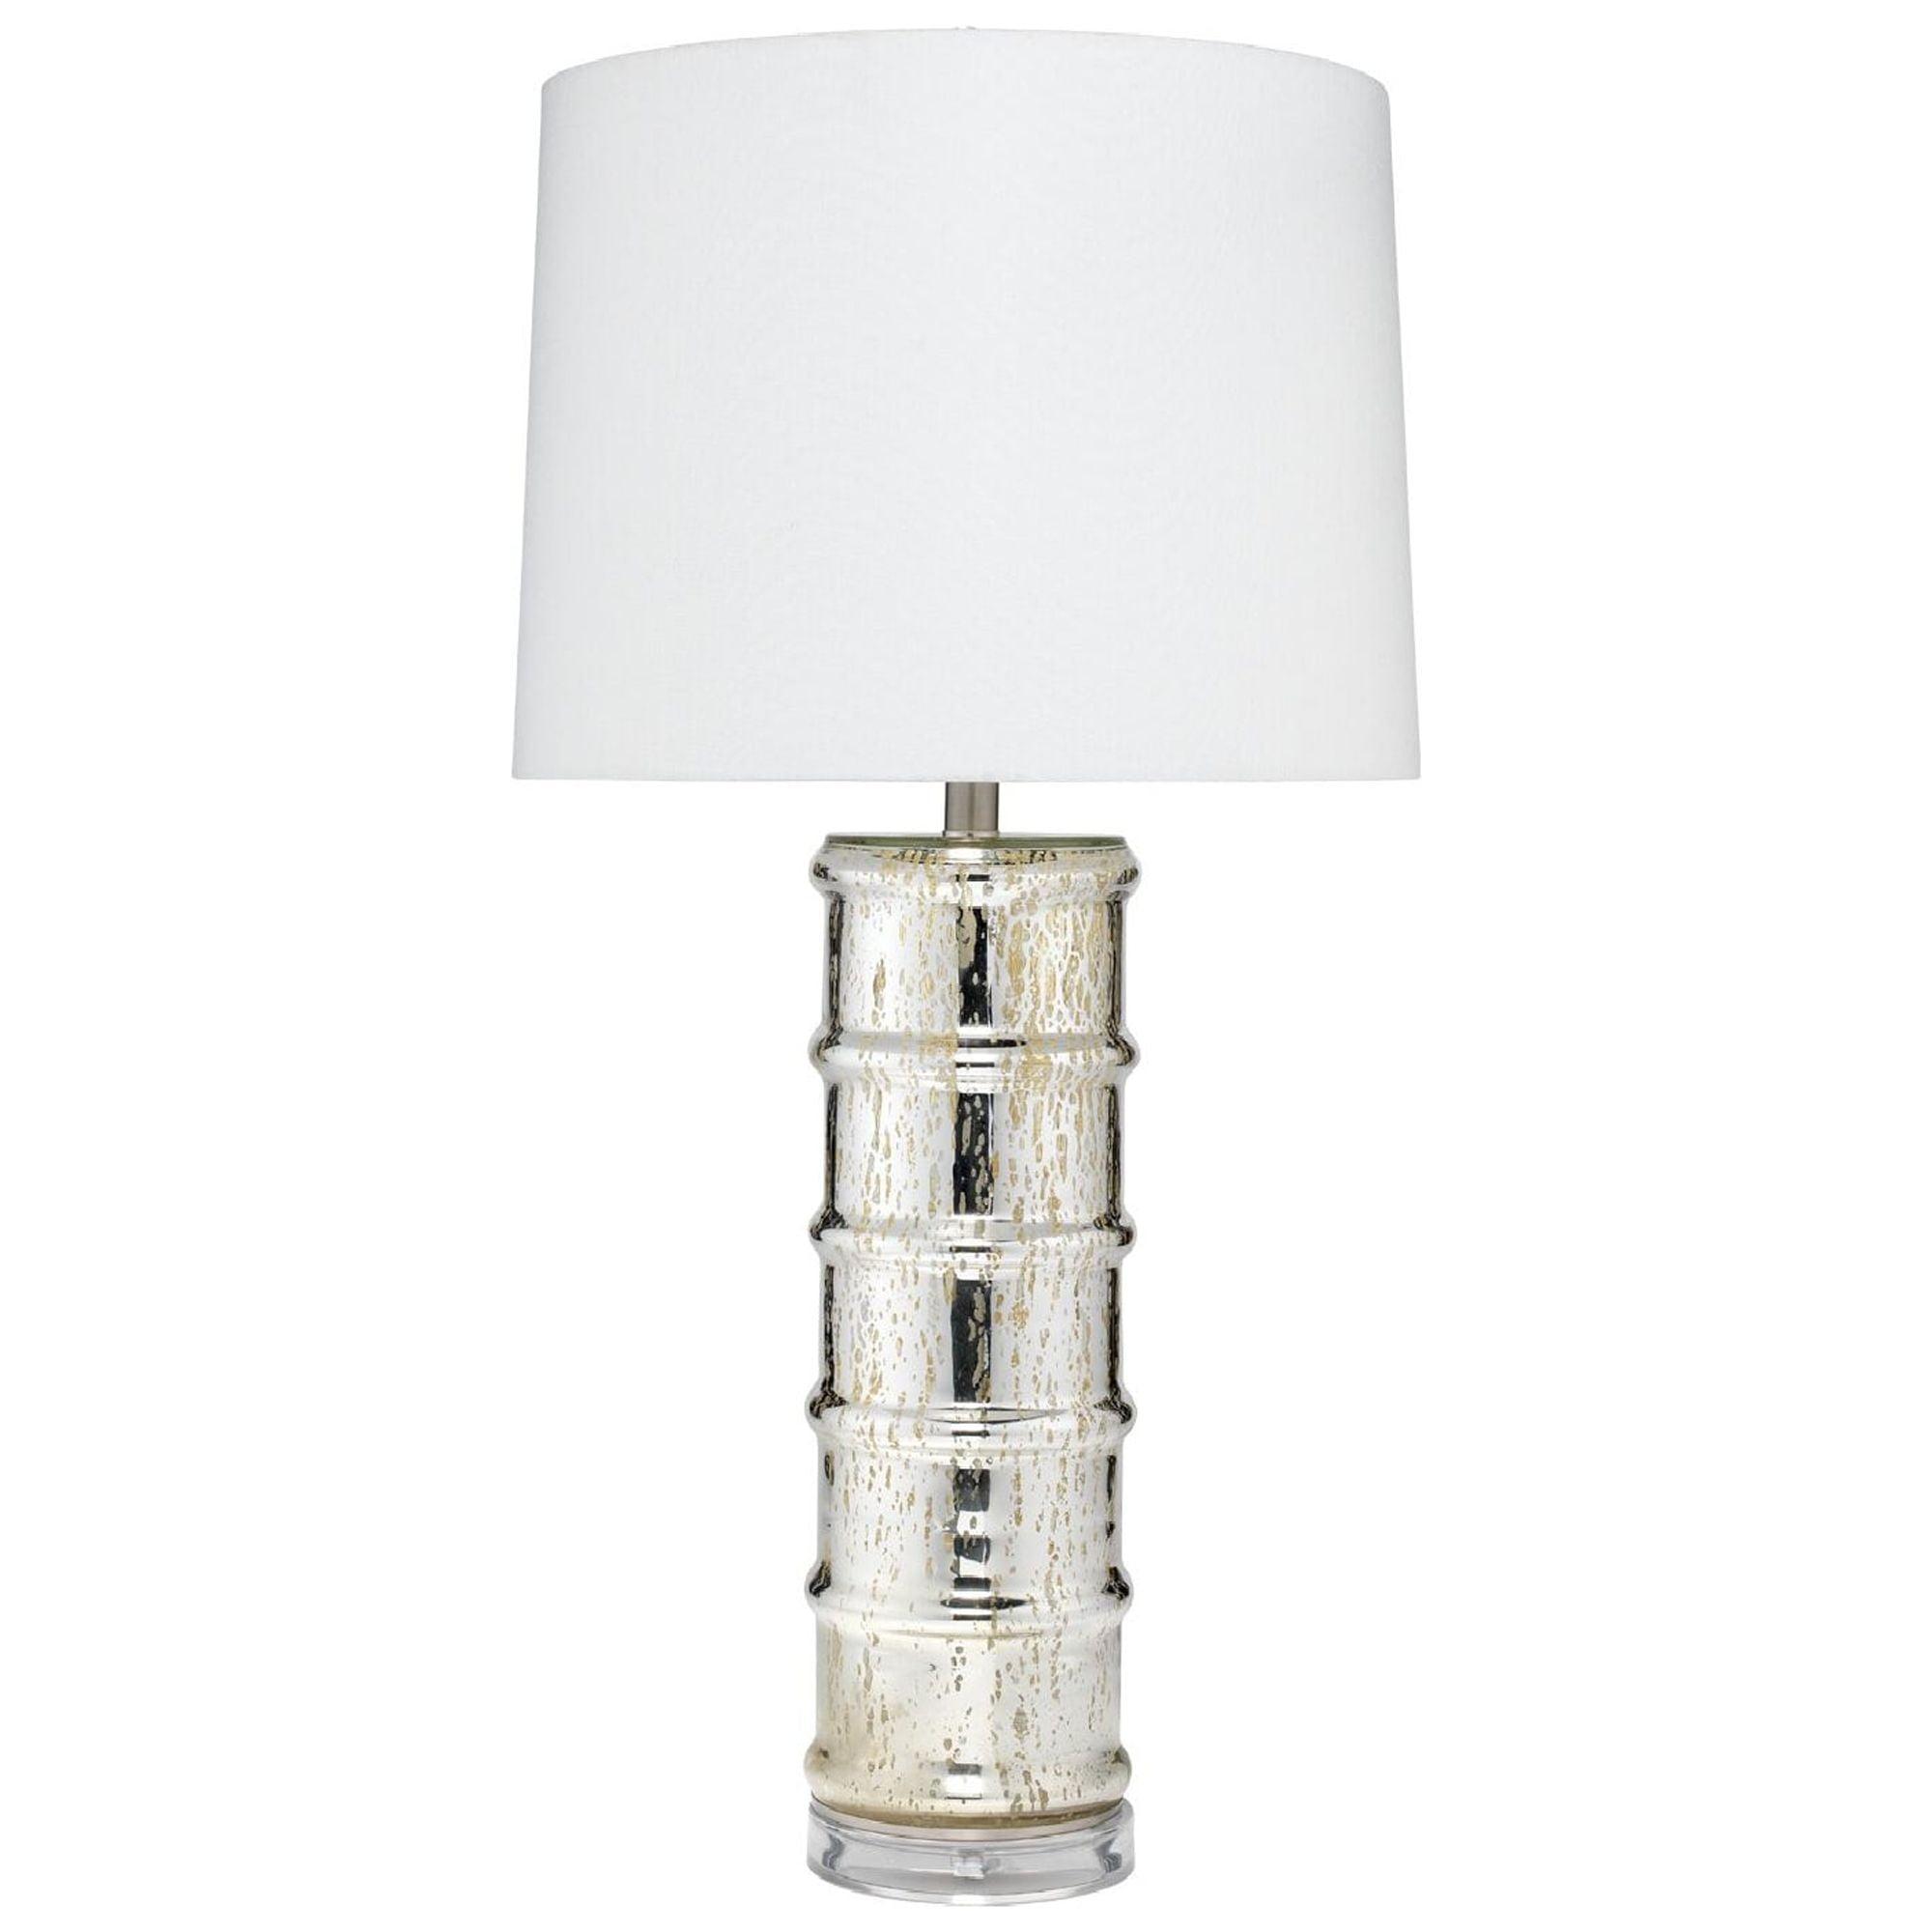 Elegant Mercury Glass 28" Silver Table Lamp with Off-White Linen Shade